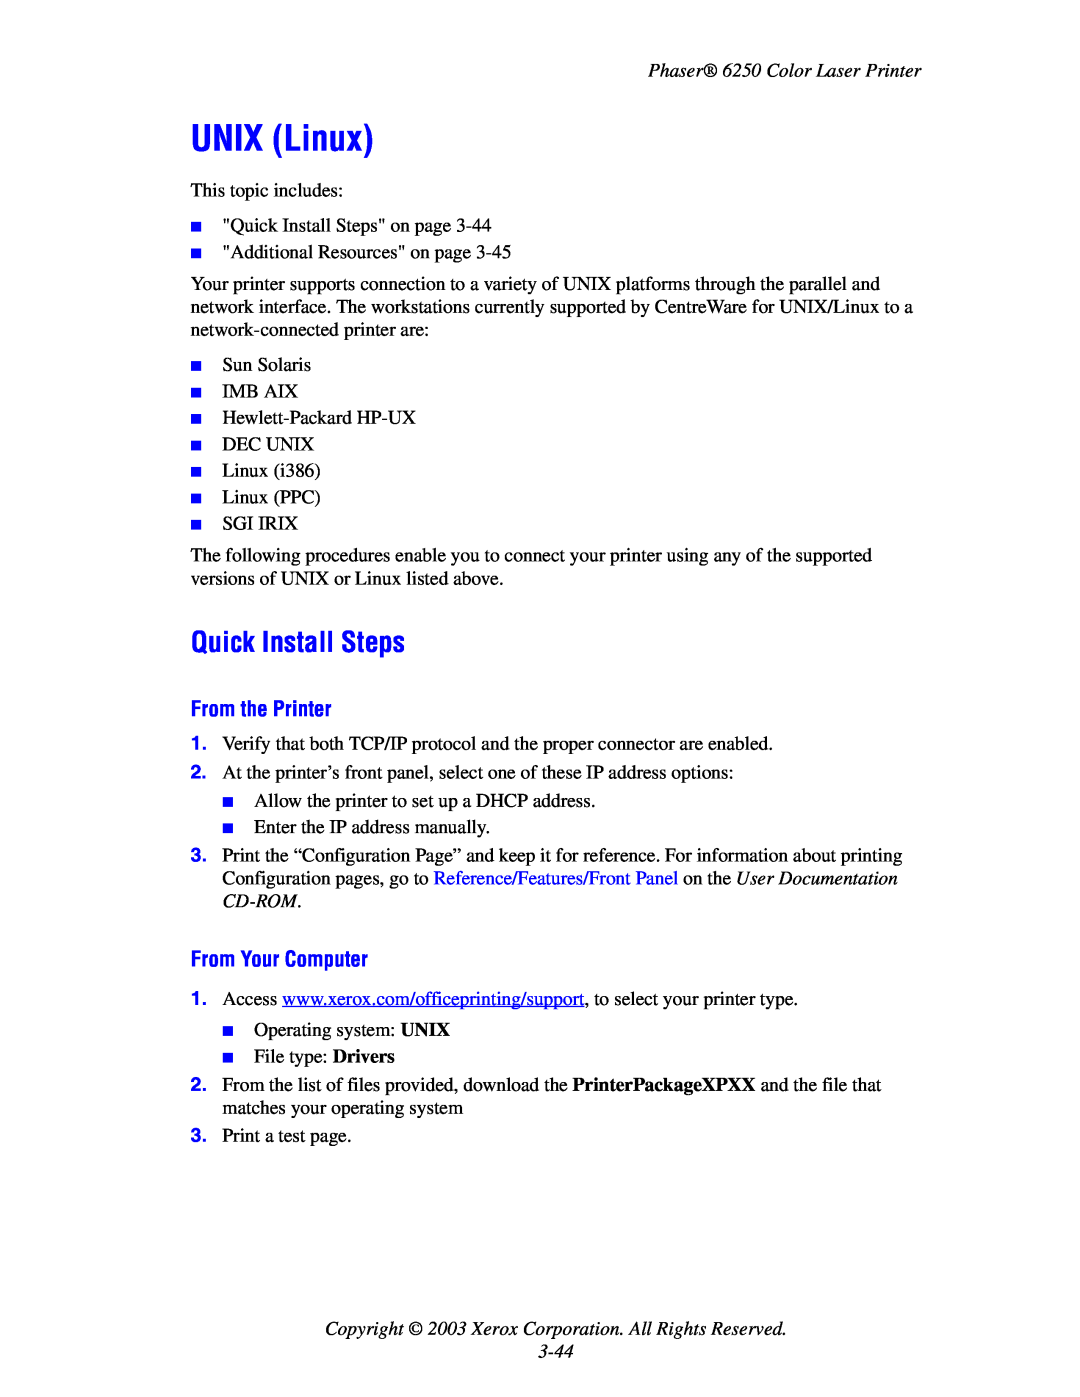 Xerox manual Quick Install Steps, Phaser 6250 Color Laser Printer, 3-44, UNIX Linux, From the Printer 